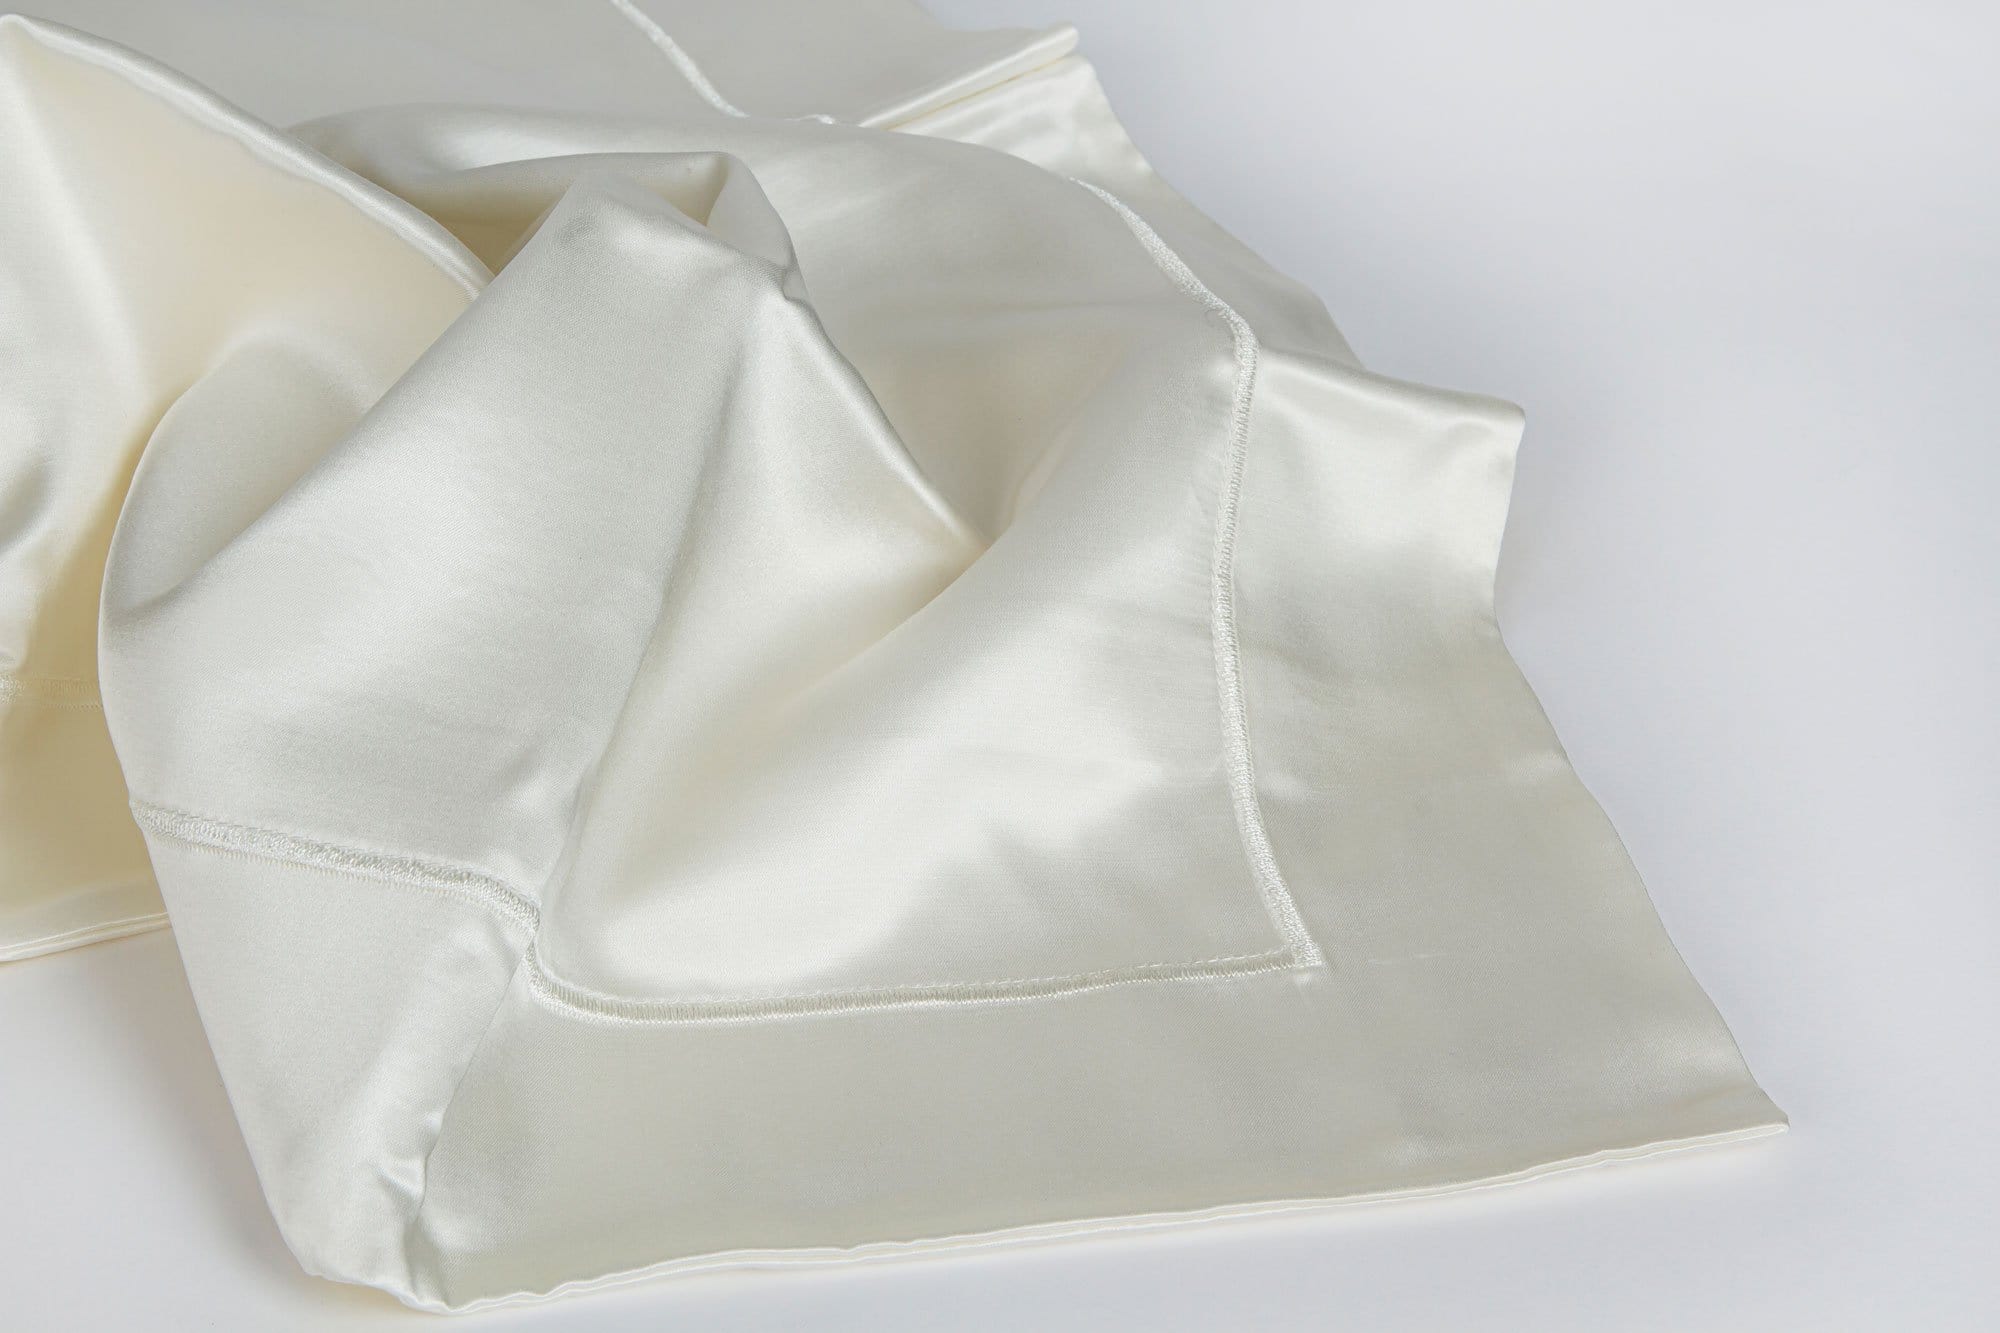 Lunesilk Duvet and pillowcase set - 50% off Limited Time Offer